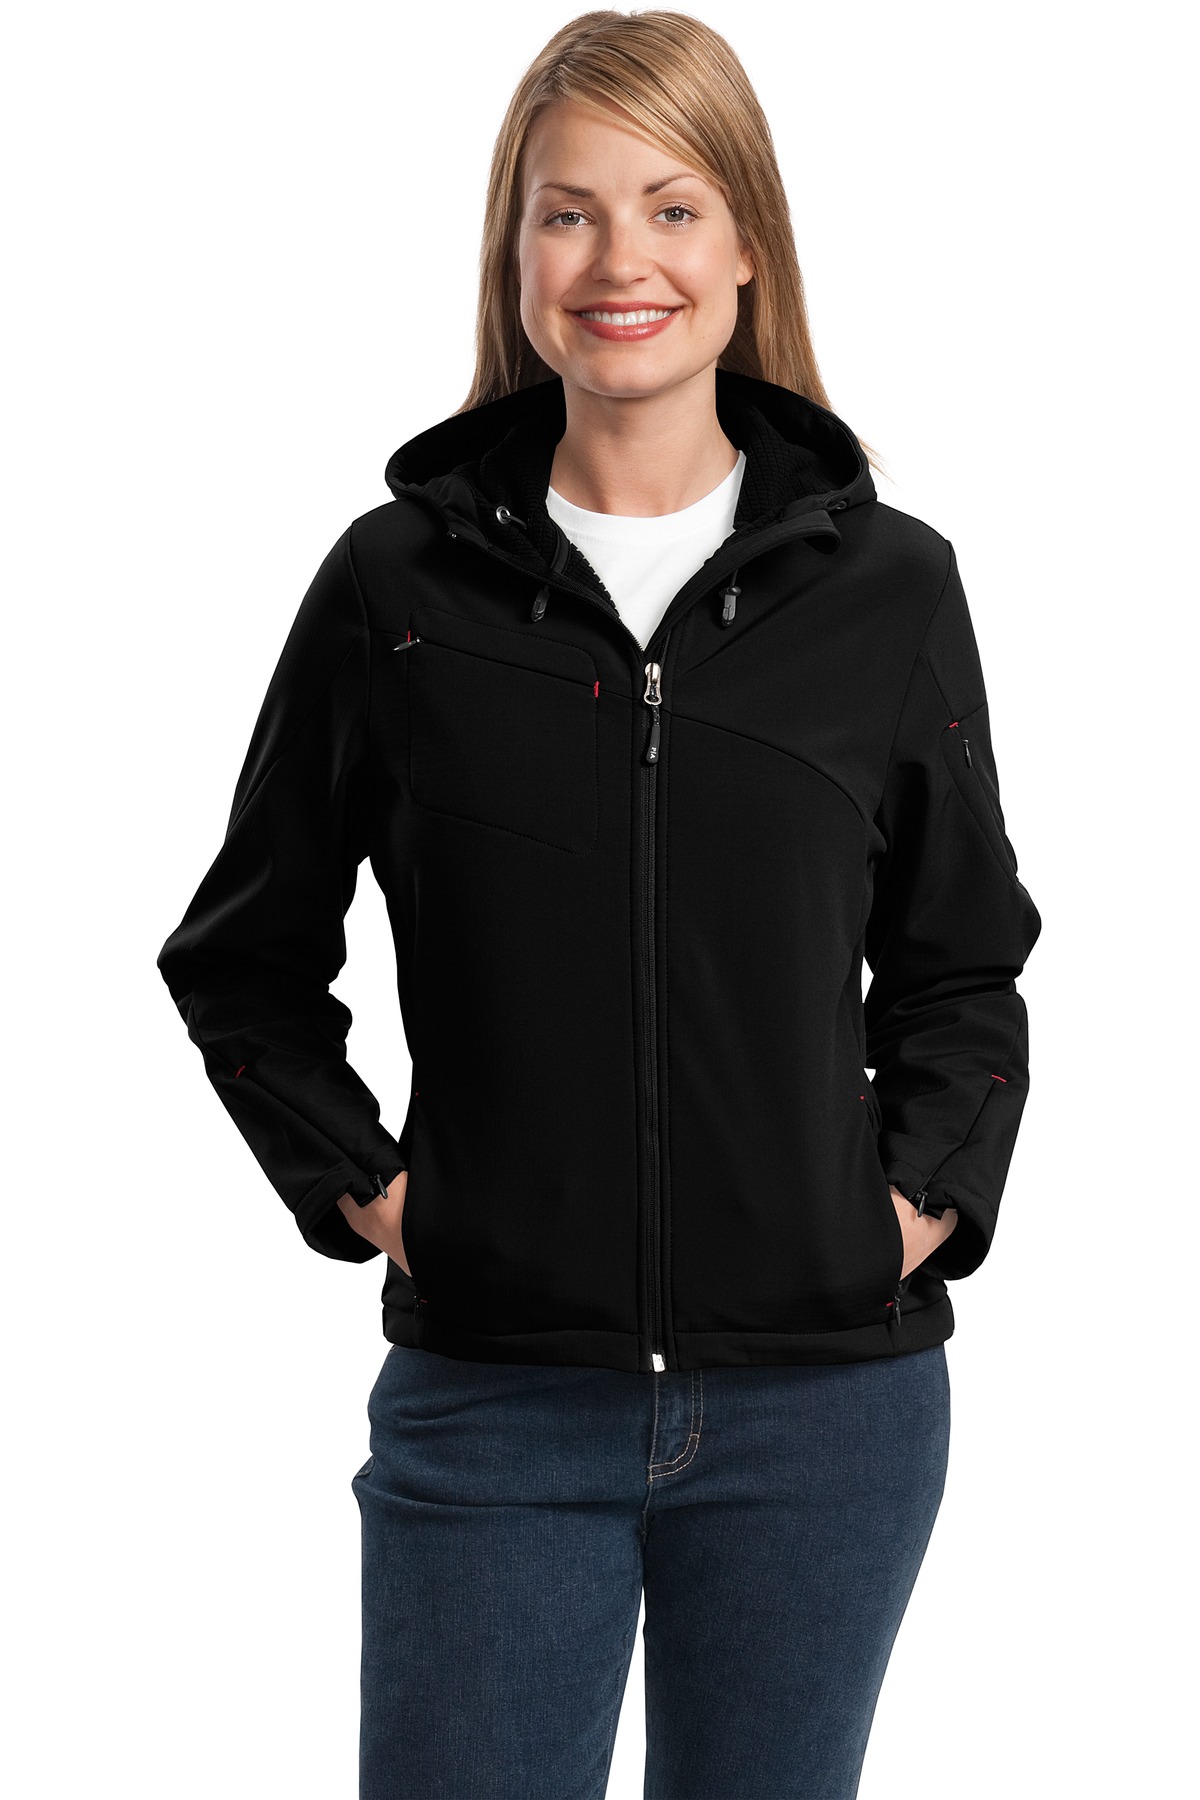 Port Authority Ladies Textured Hooded Soft Shell Jacket. L706